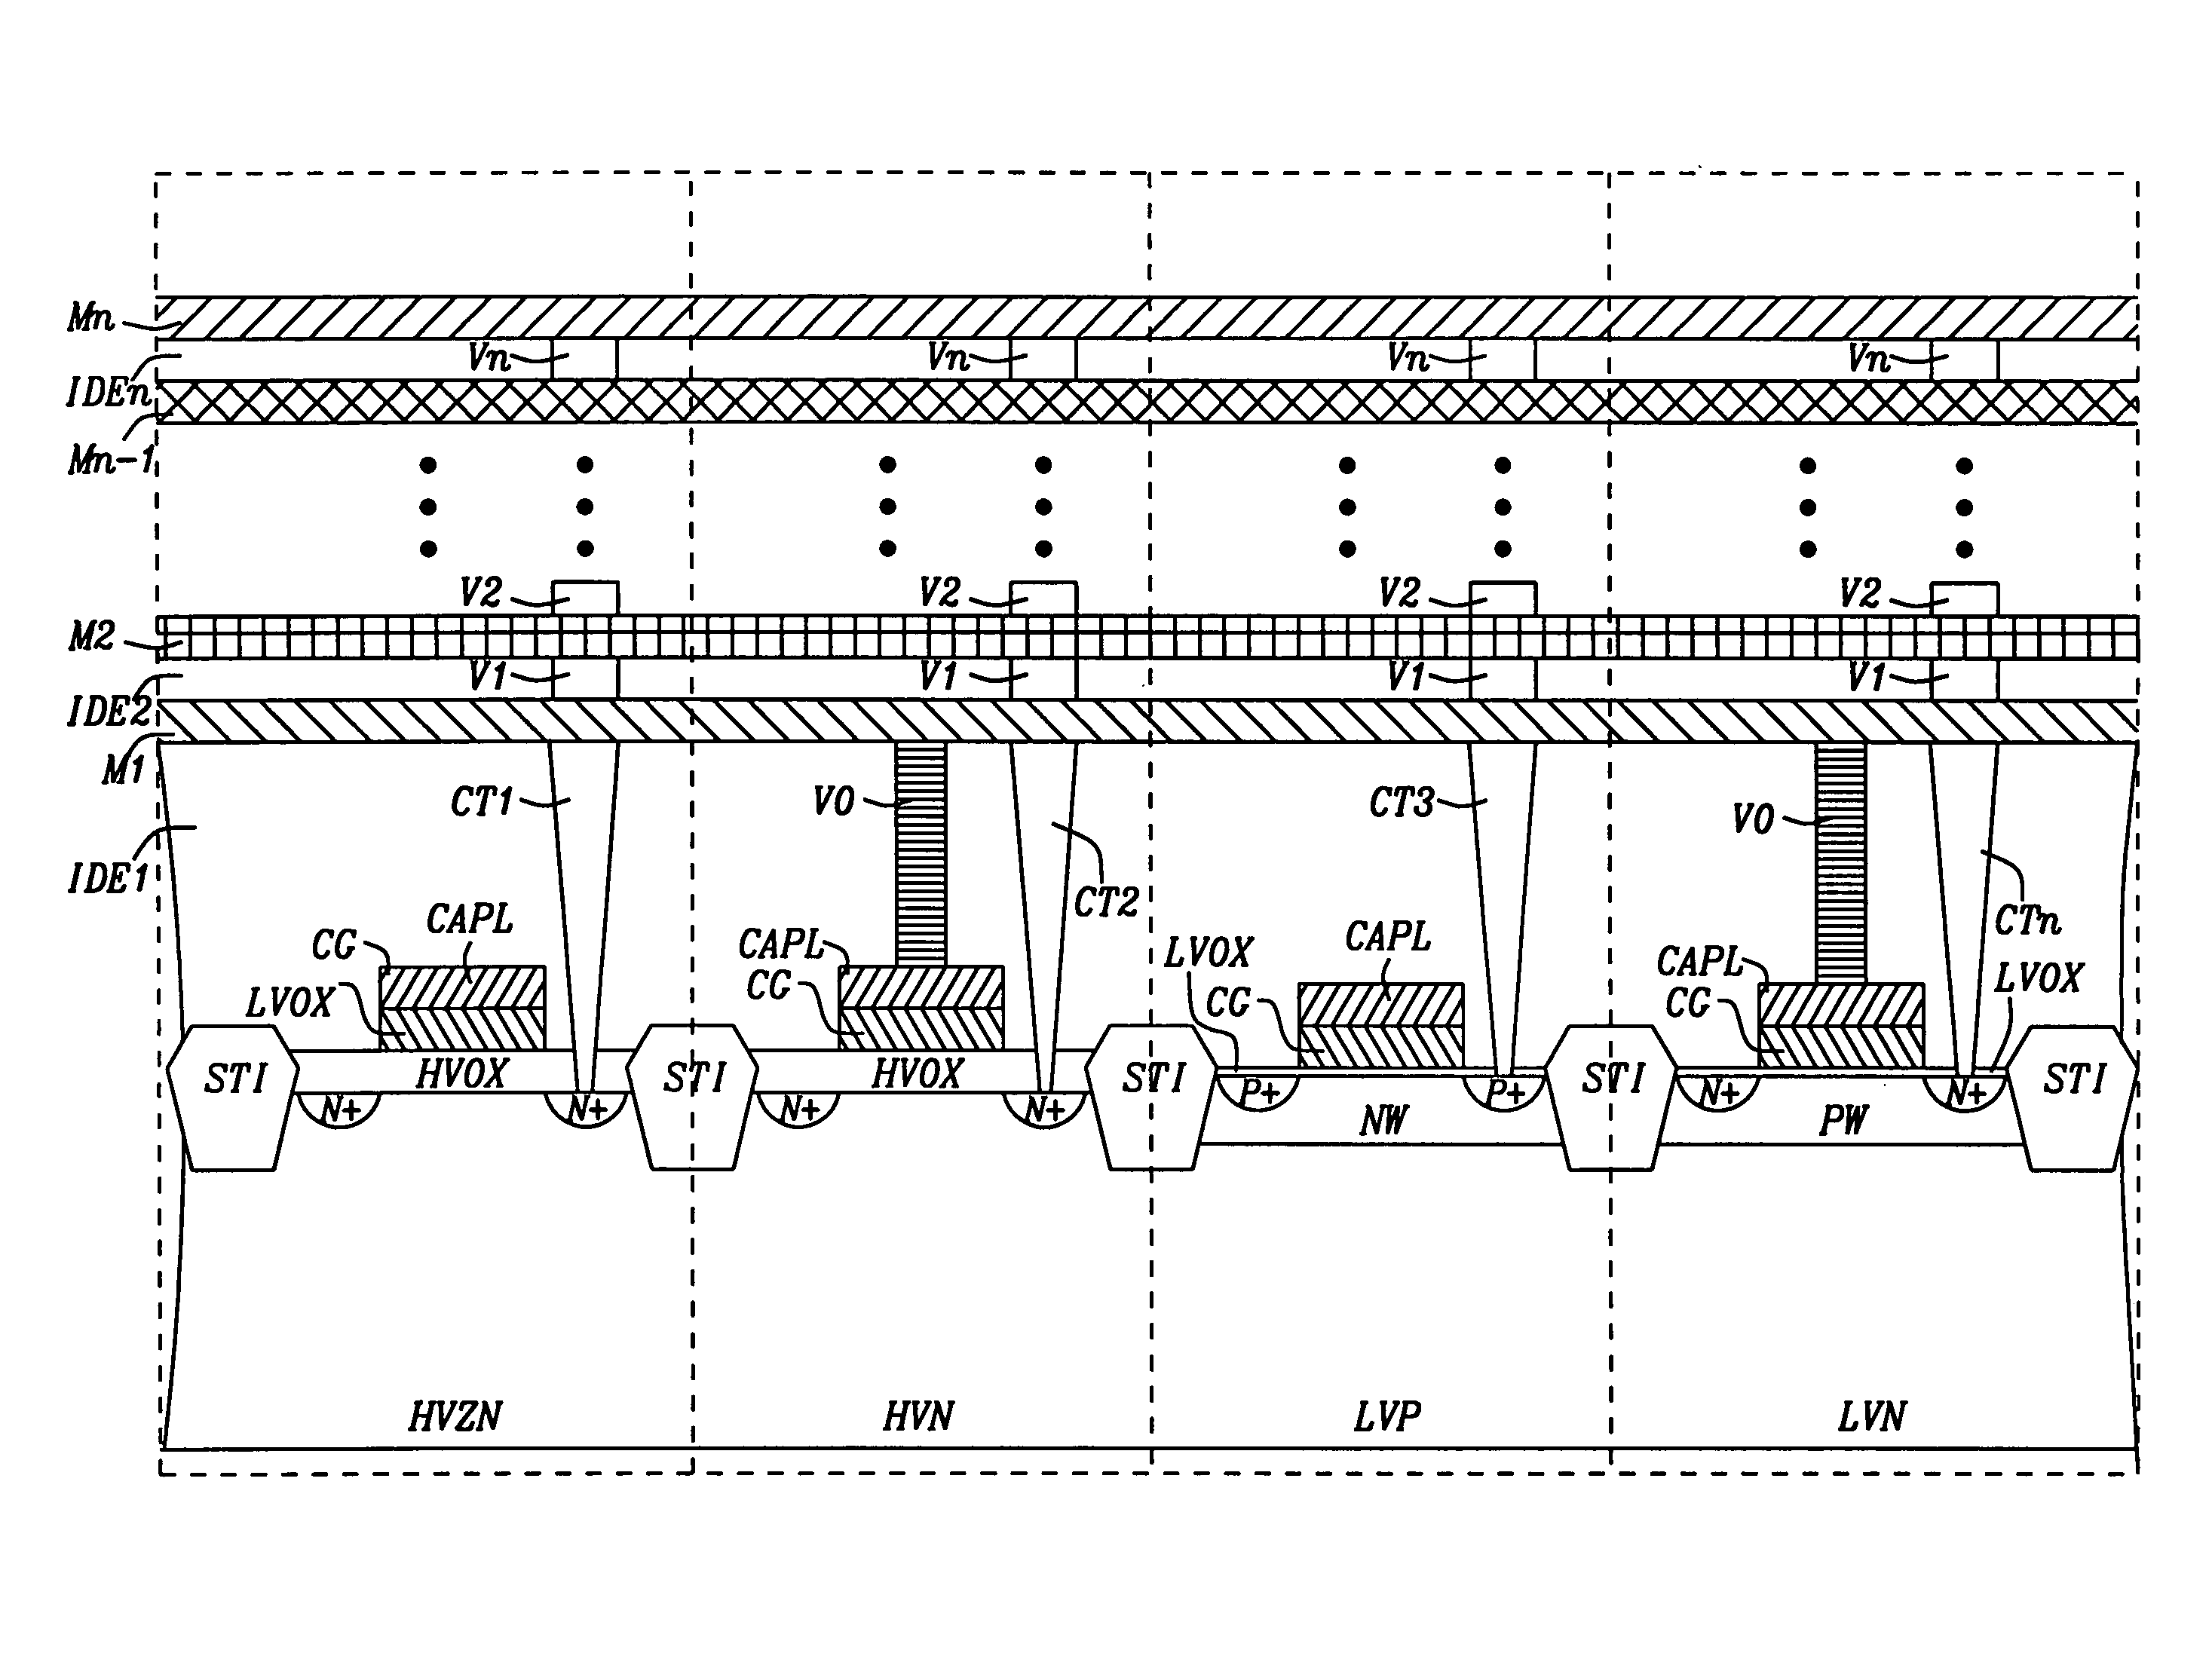 Embedded NOR flash memory process with NAND cell and true logic compatible low voltage device